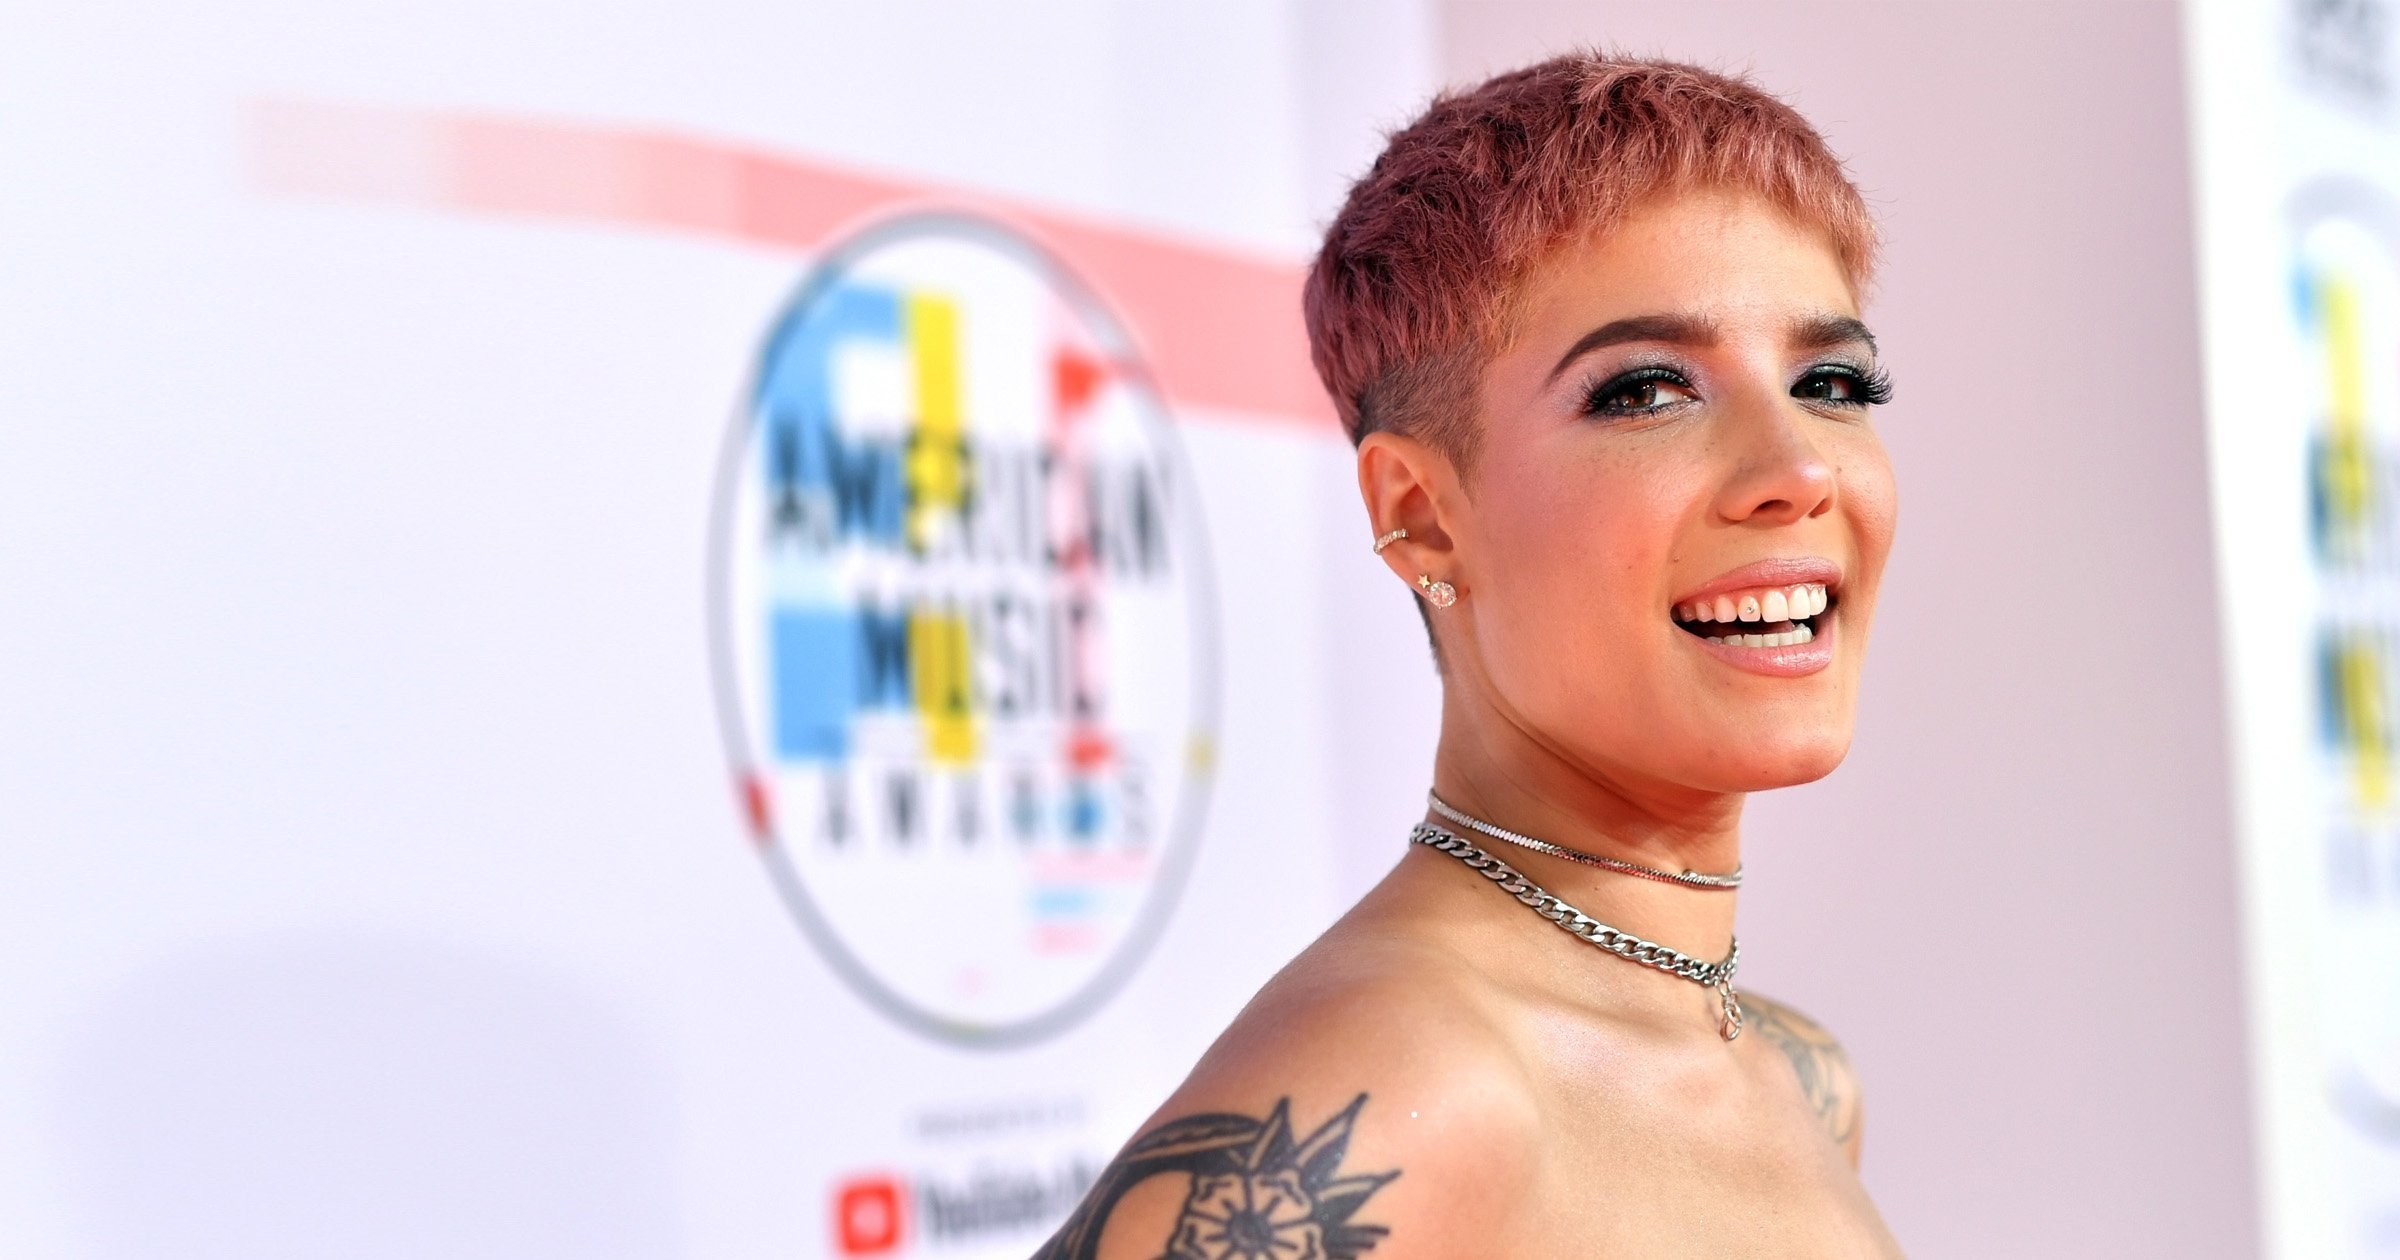 Halsey is expecting her first child as she announces surprise pregnancy